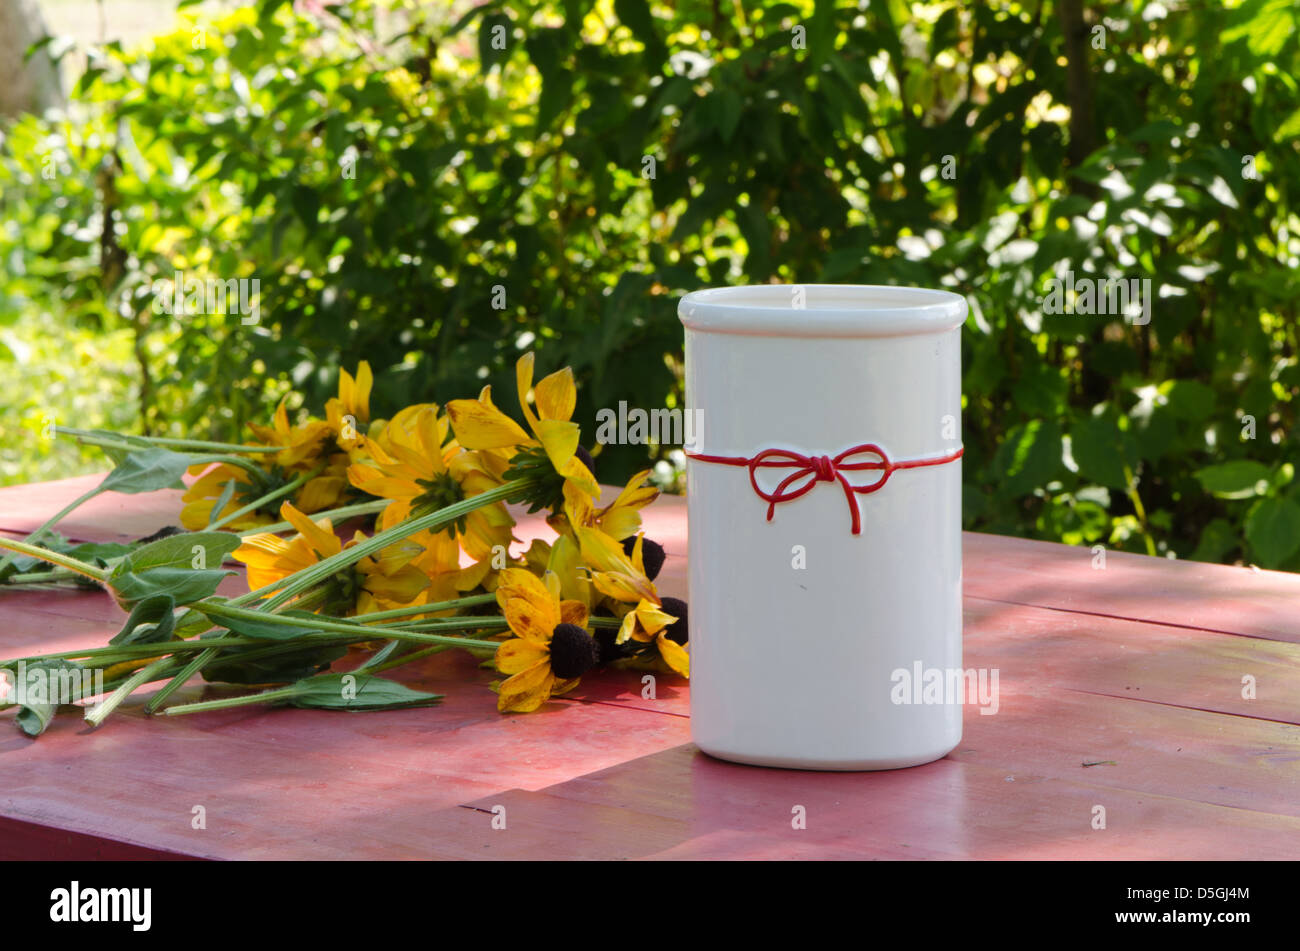 rudbekia flowers lie near white decorative beautiful vase on rural outdoor wooden table. Stock Photo